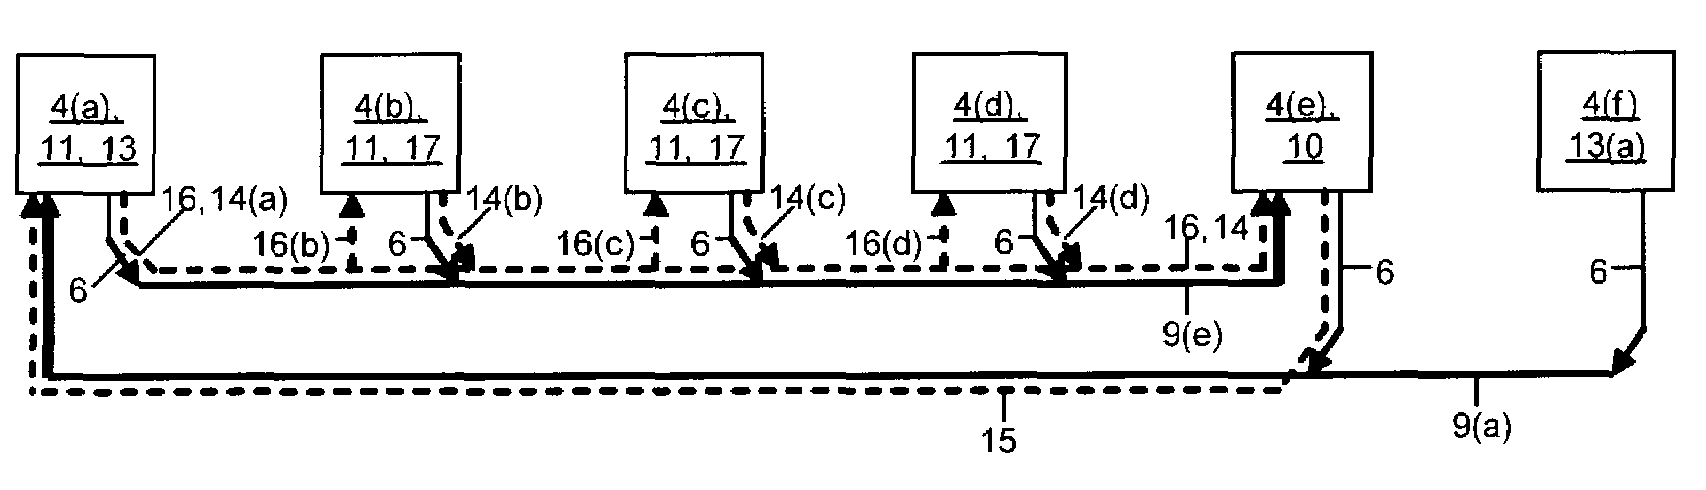 Dynamically channelizable packet transport network